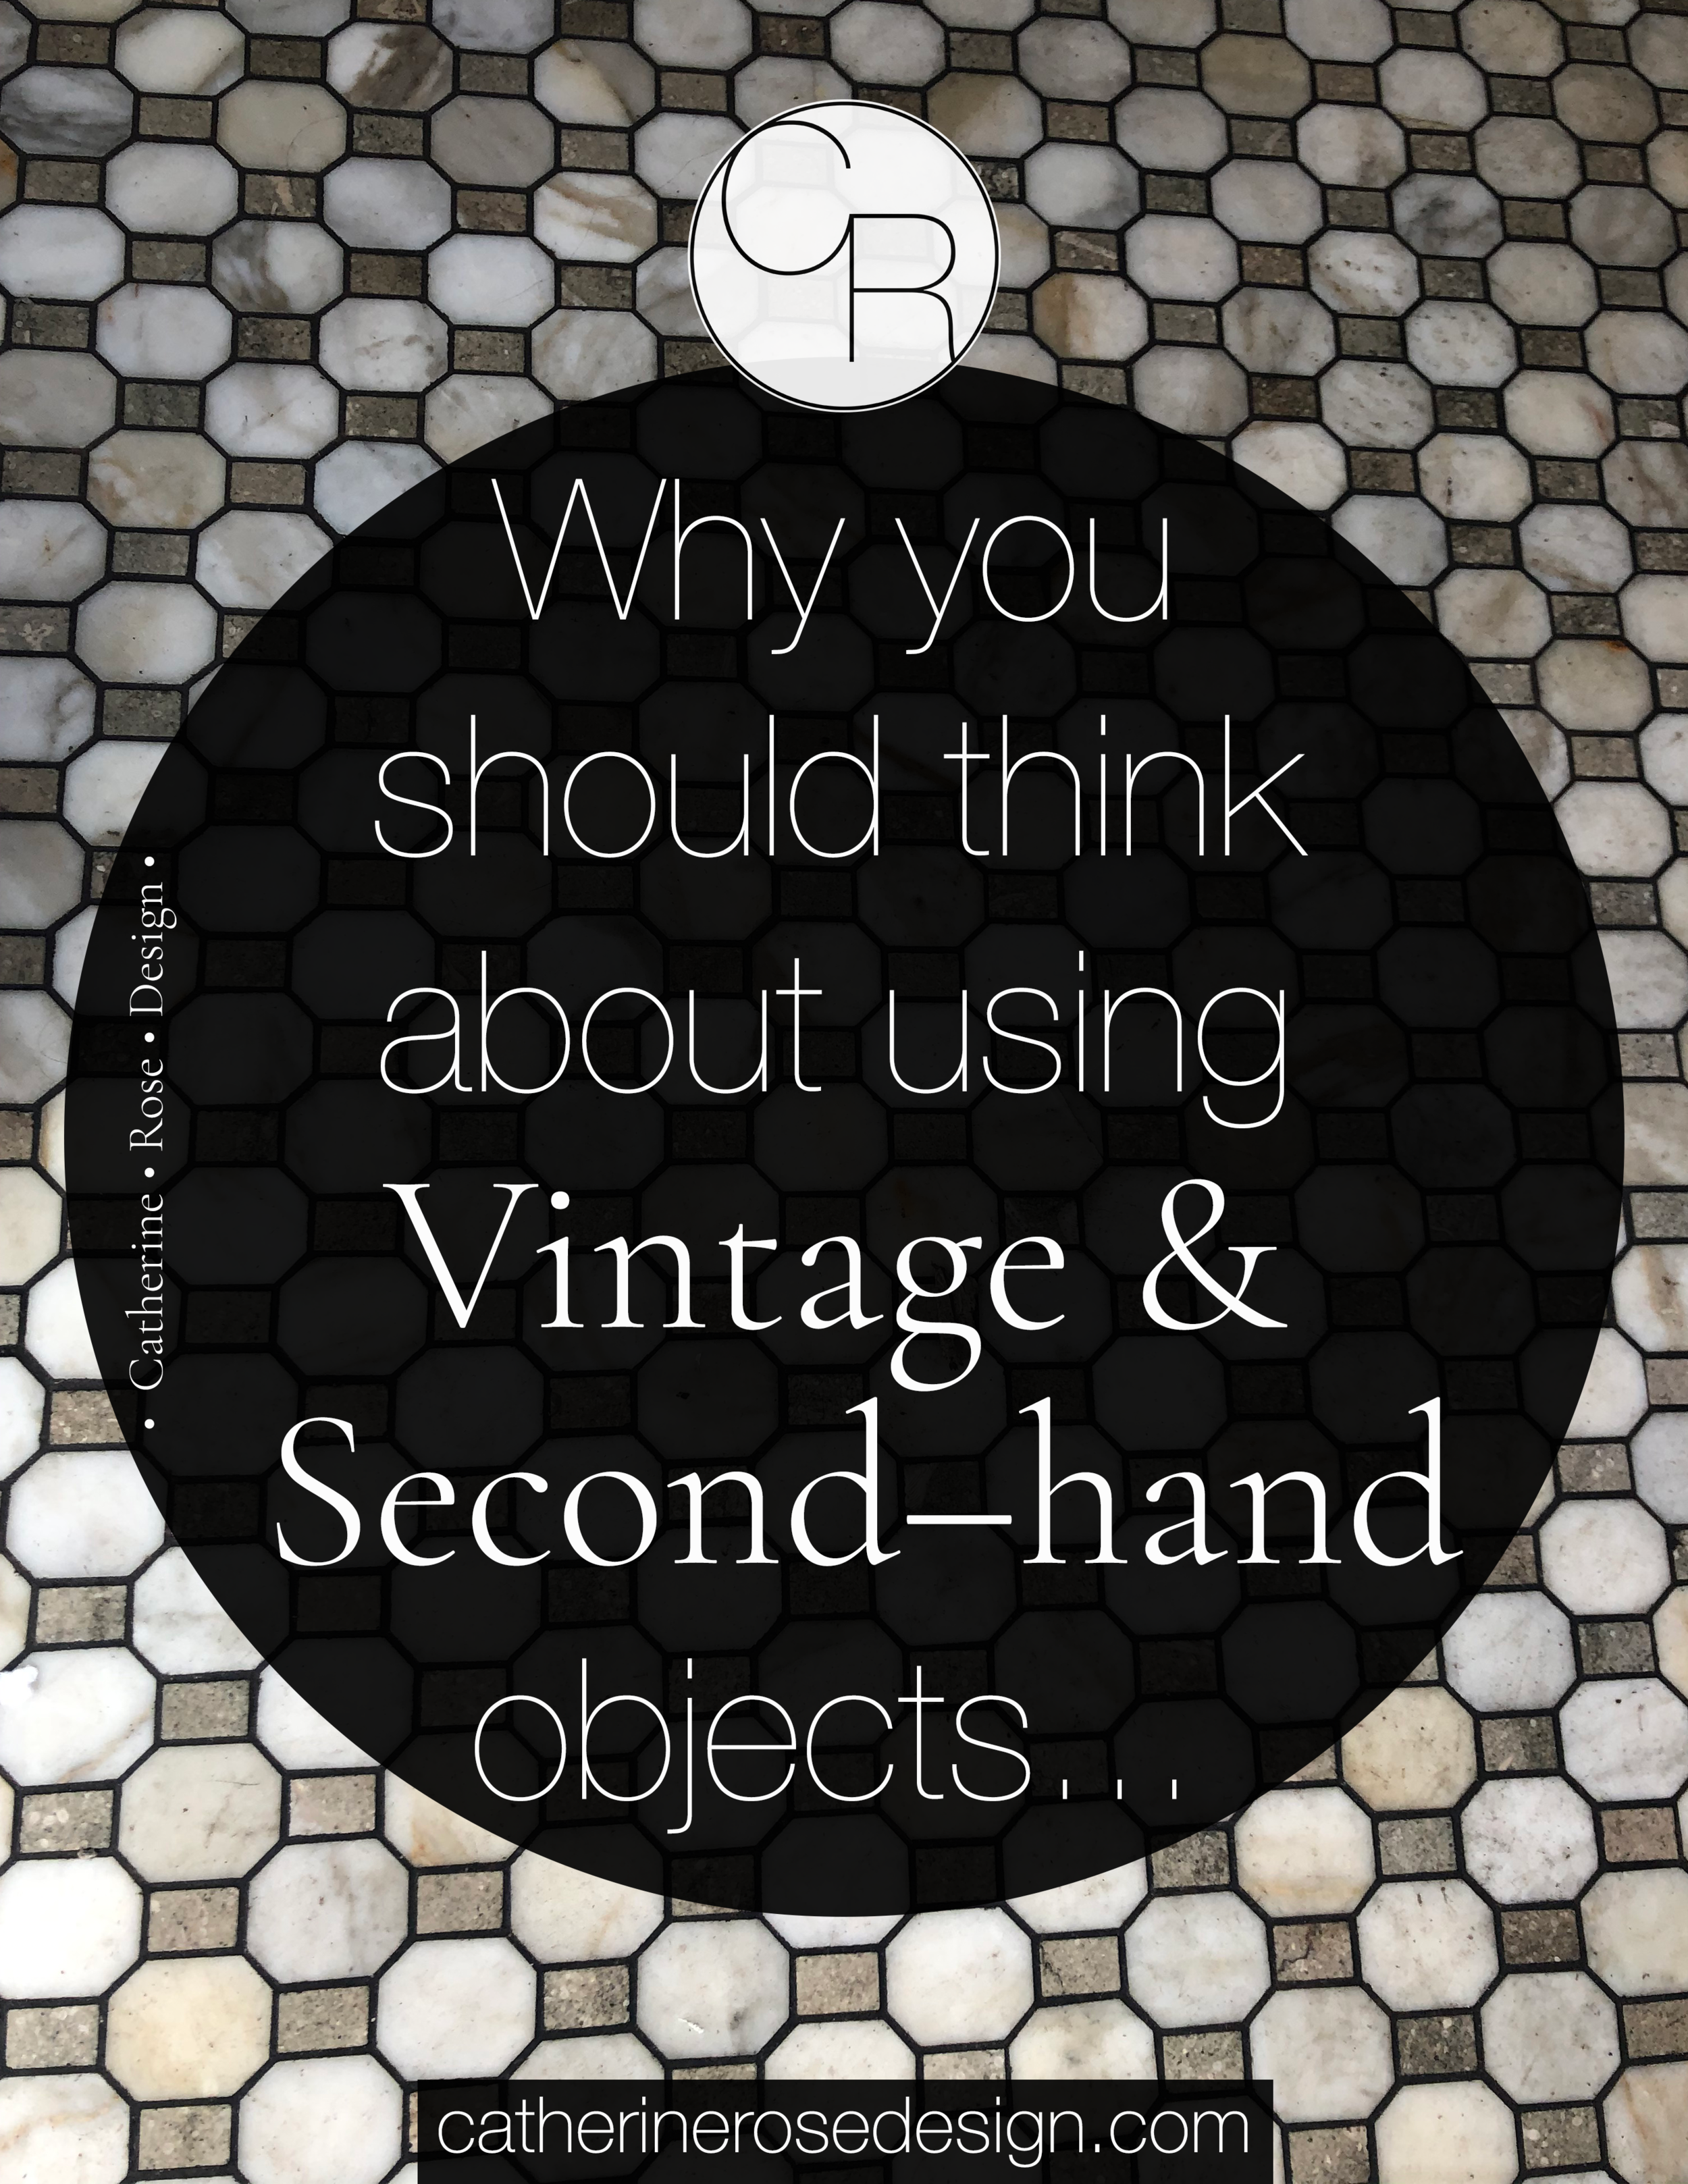 Why you should think about using vintage and second-hand objects (Copy) (Copy) (Copy) (Copy) (Copy) (Copy) (Copy) (Copy) (Copy) (Copy)